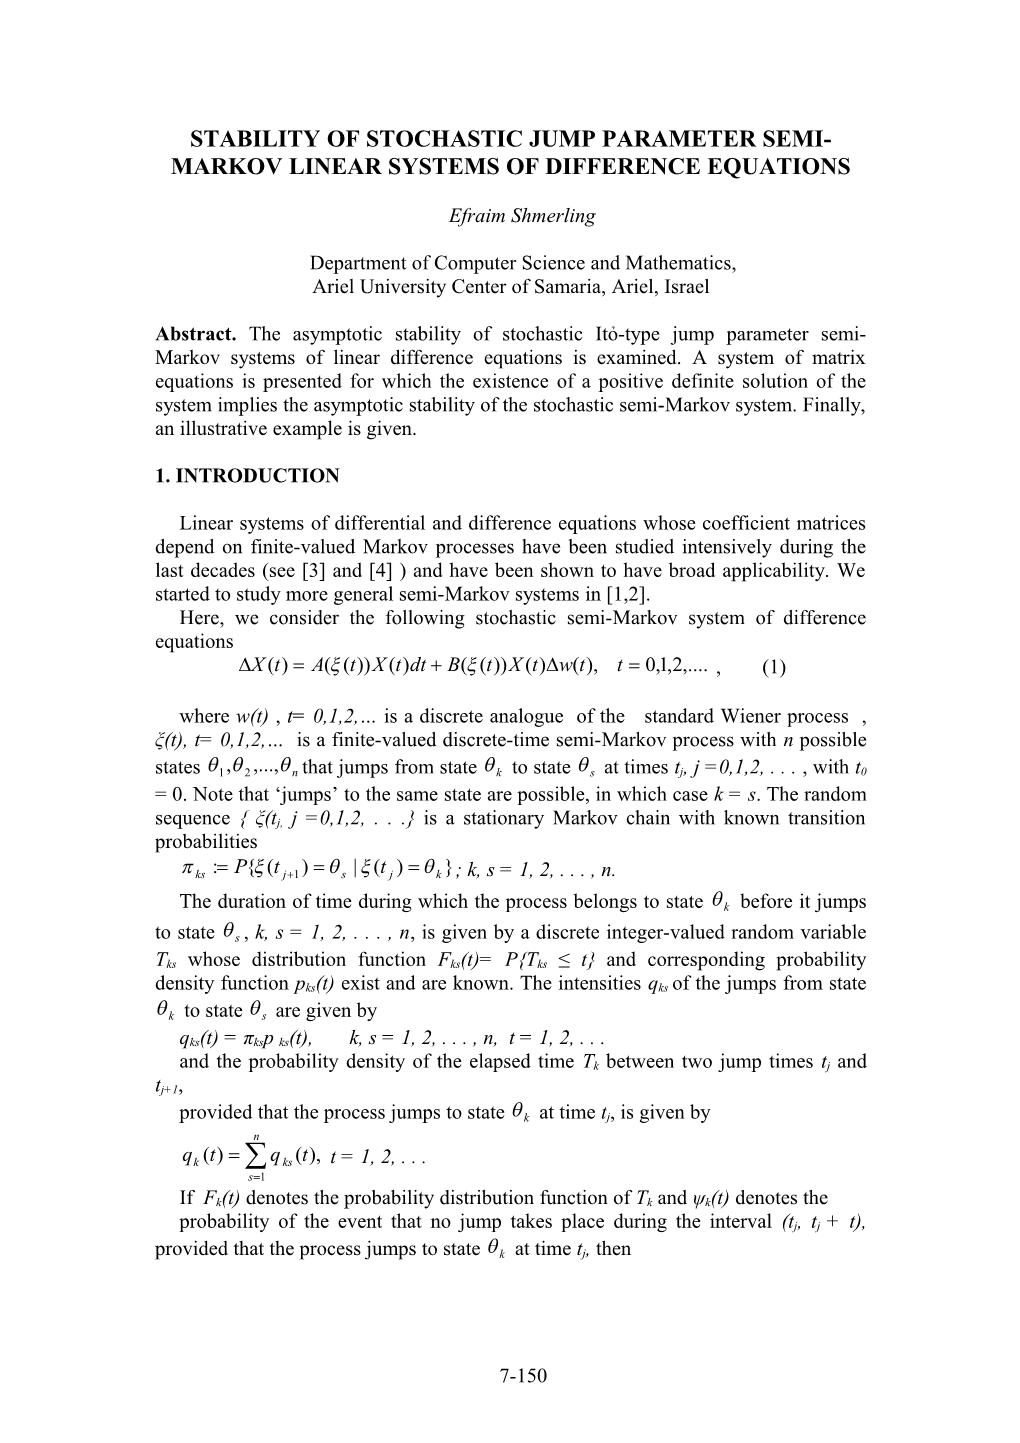 Stability of Stochastic Jump Parameter Semi-Markov Linear Systems of Difference Equations